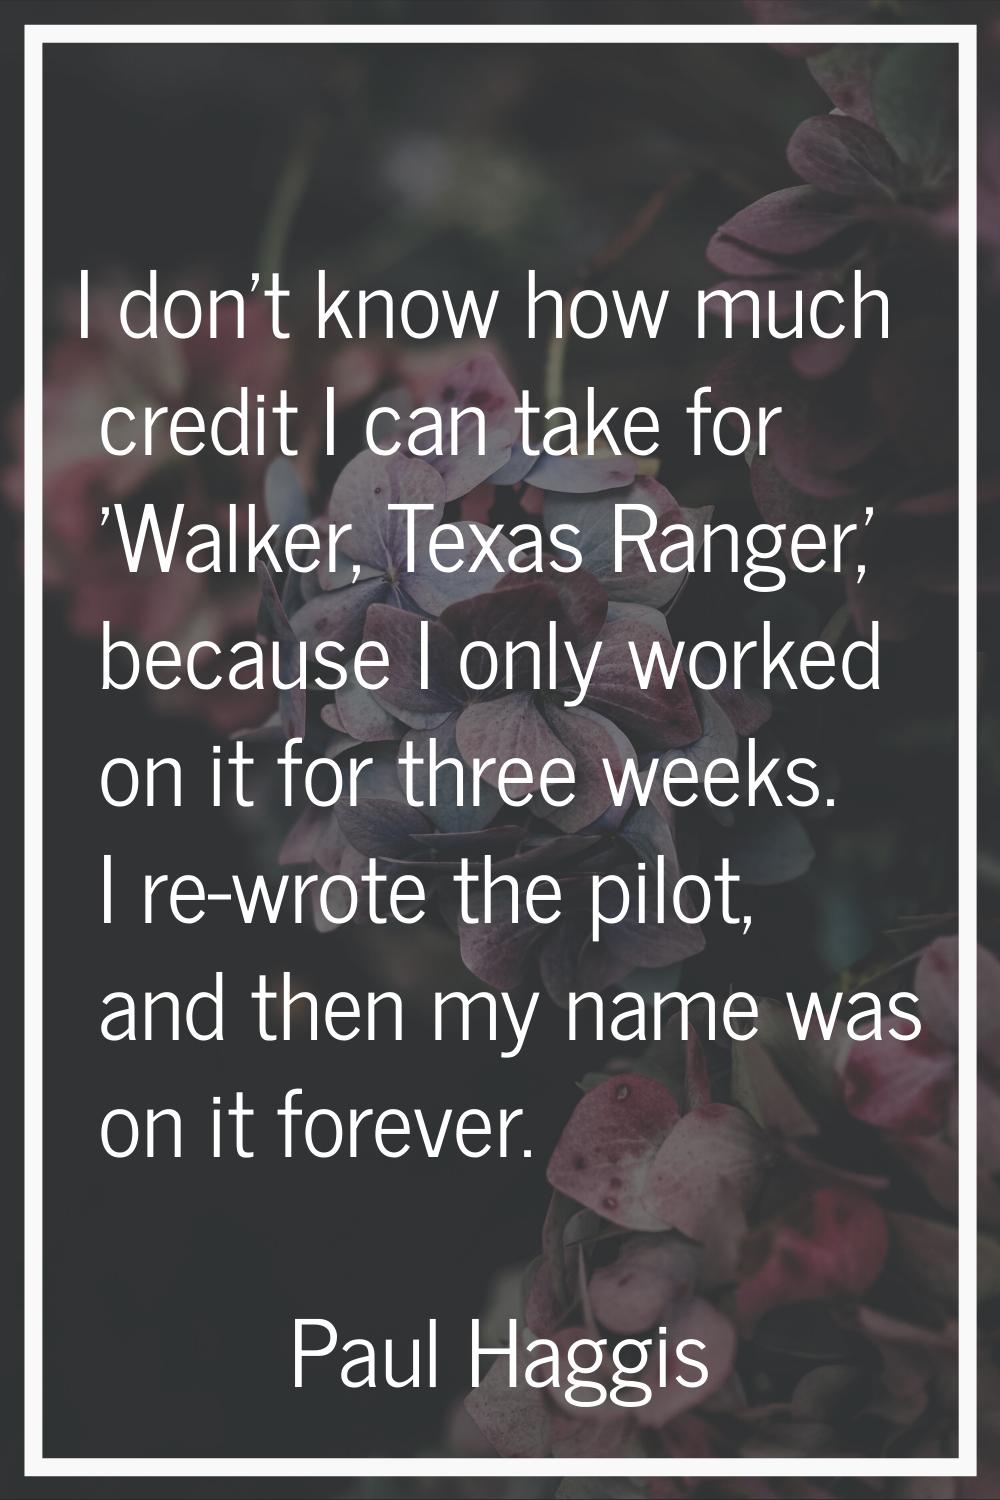 I don't know how much credit I can take for 'Walker, Texas Ranger,' because I only worked on it for